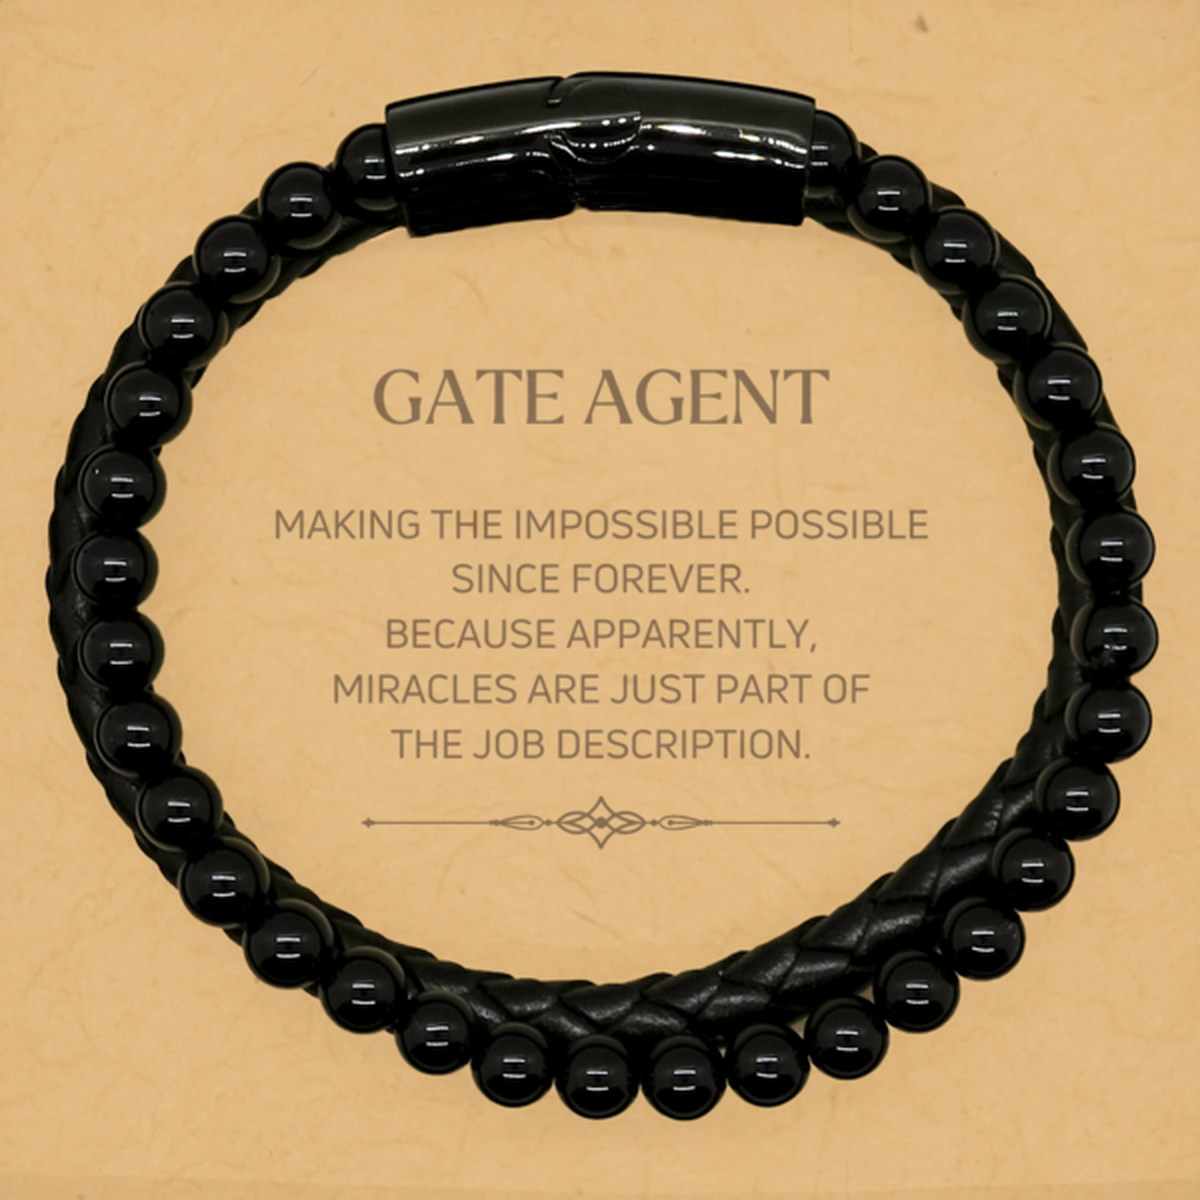 Funny Gate Agent Gifts, Miracles are just part of the job description, Inspirational Birthday Stone Leather Bracelets For Gate Agent, Men, Women, Coworkers, Friends, Boss